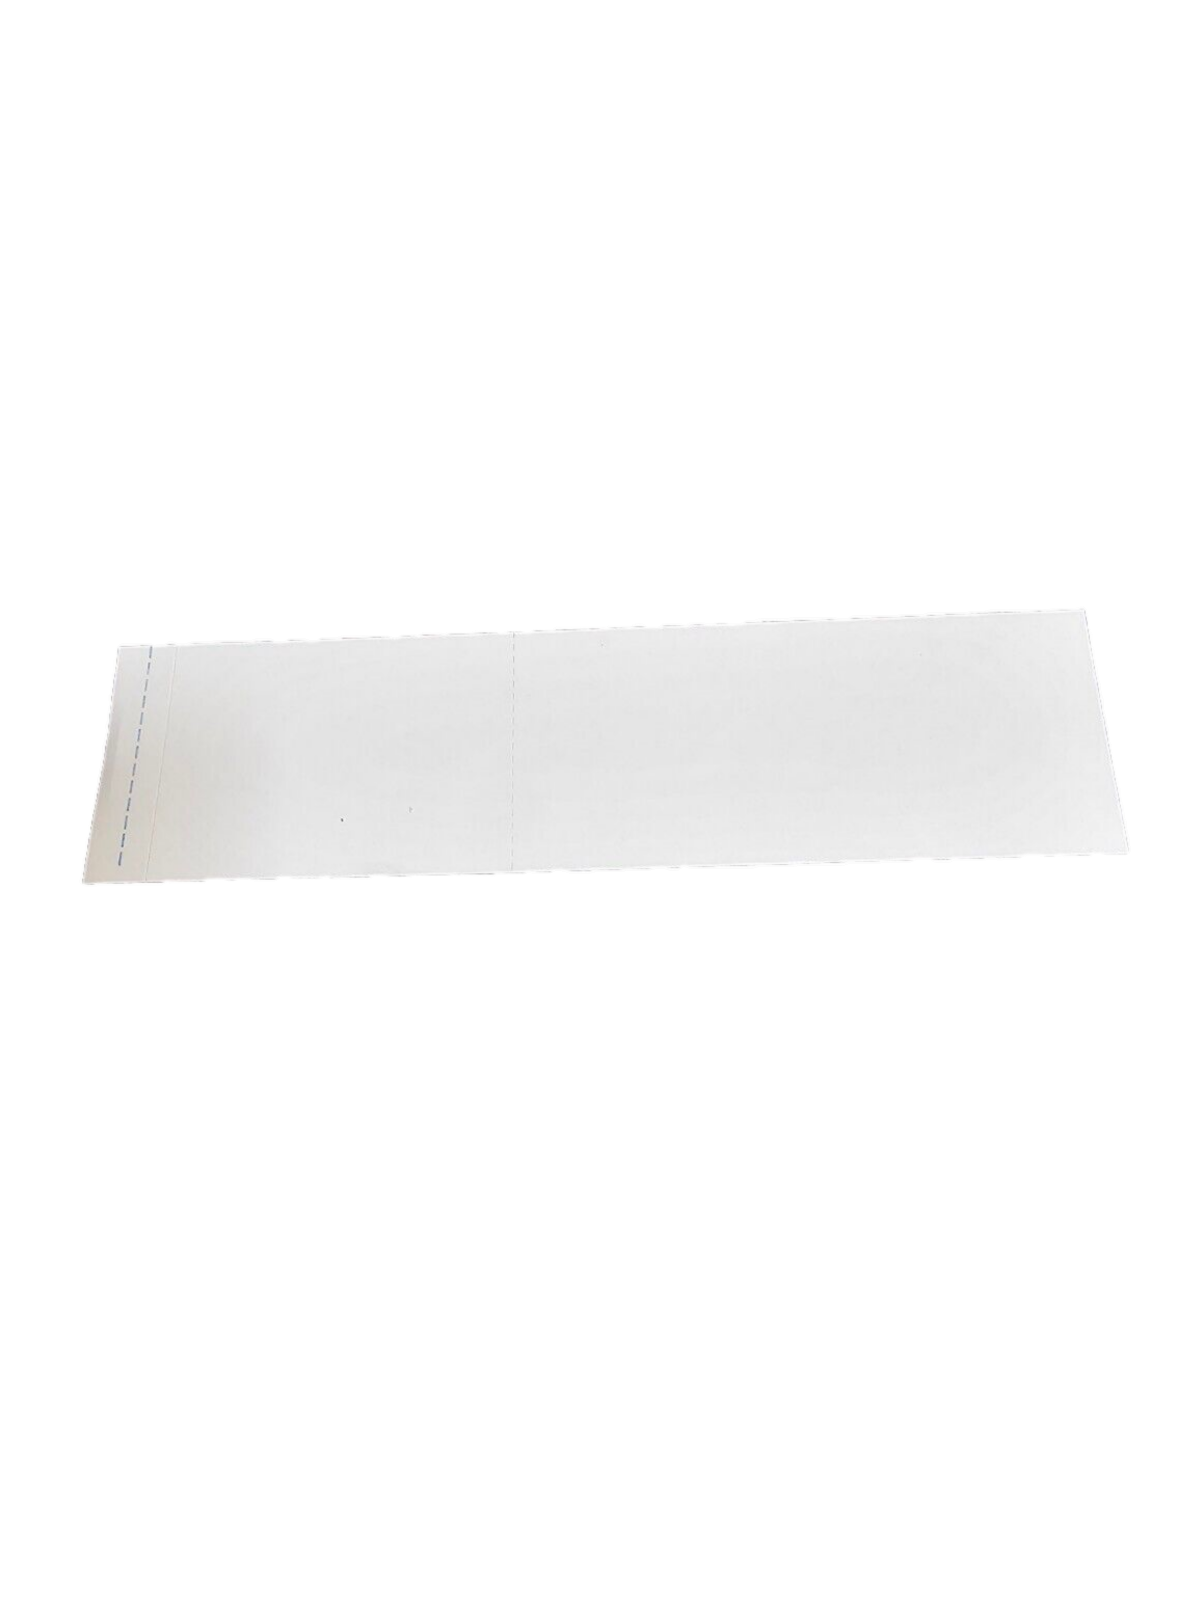 Discount Supply Company 6125-IJ Postage Meter Tape 6 1/8" x 1 9/16" Sheet with a 3/32" Peel Tab. 300